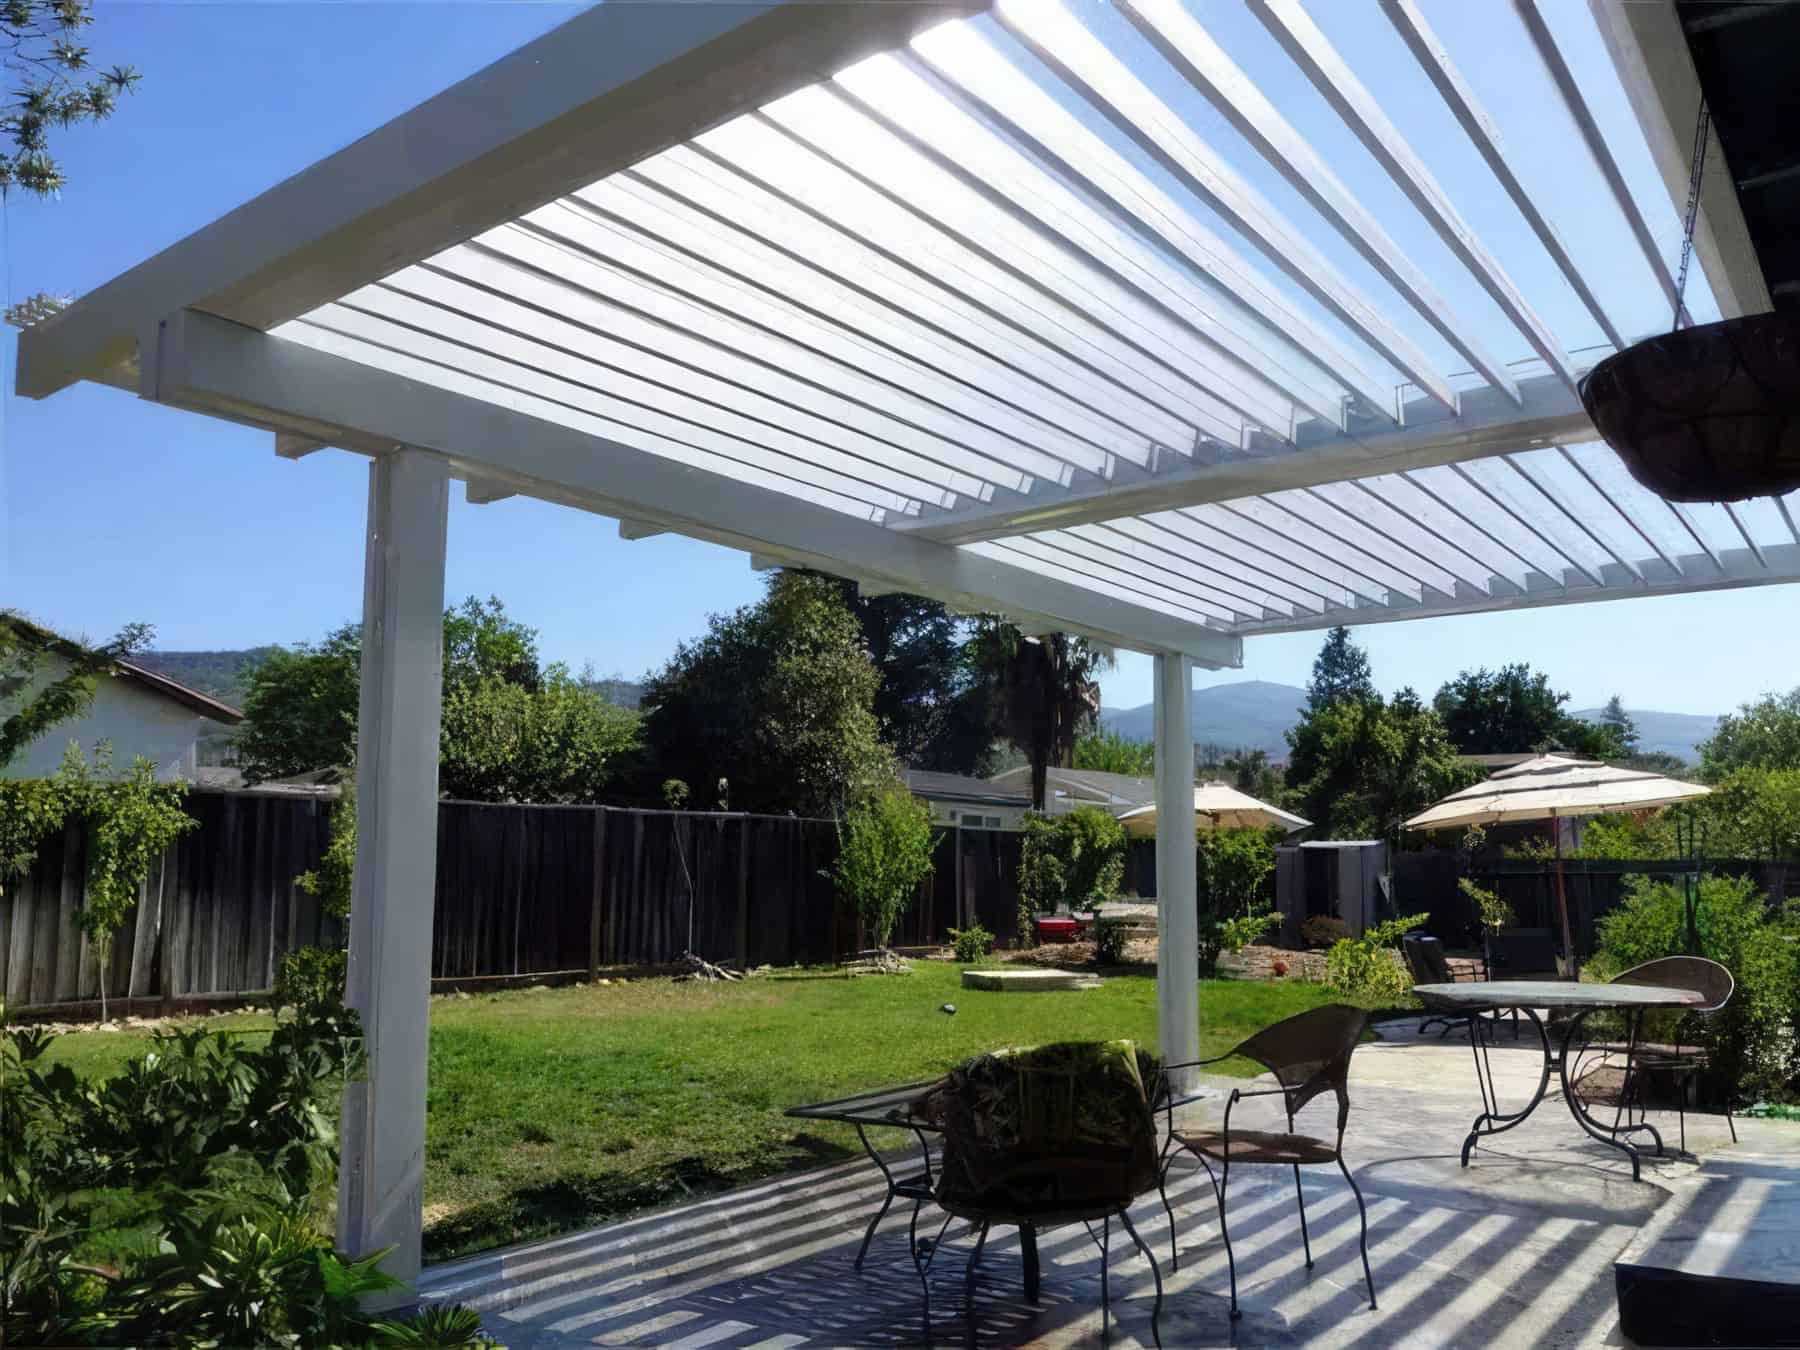 Vinyl louvered patio cover above backyard retreat with potted plants and large trees in the background